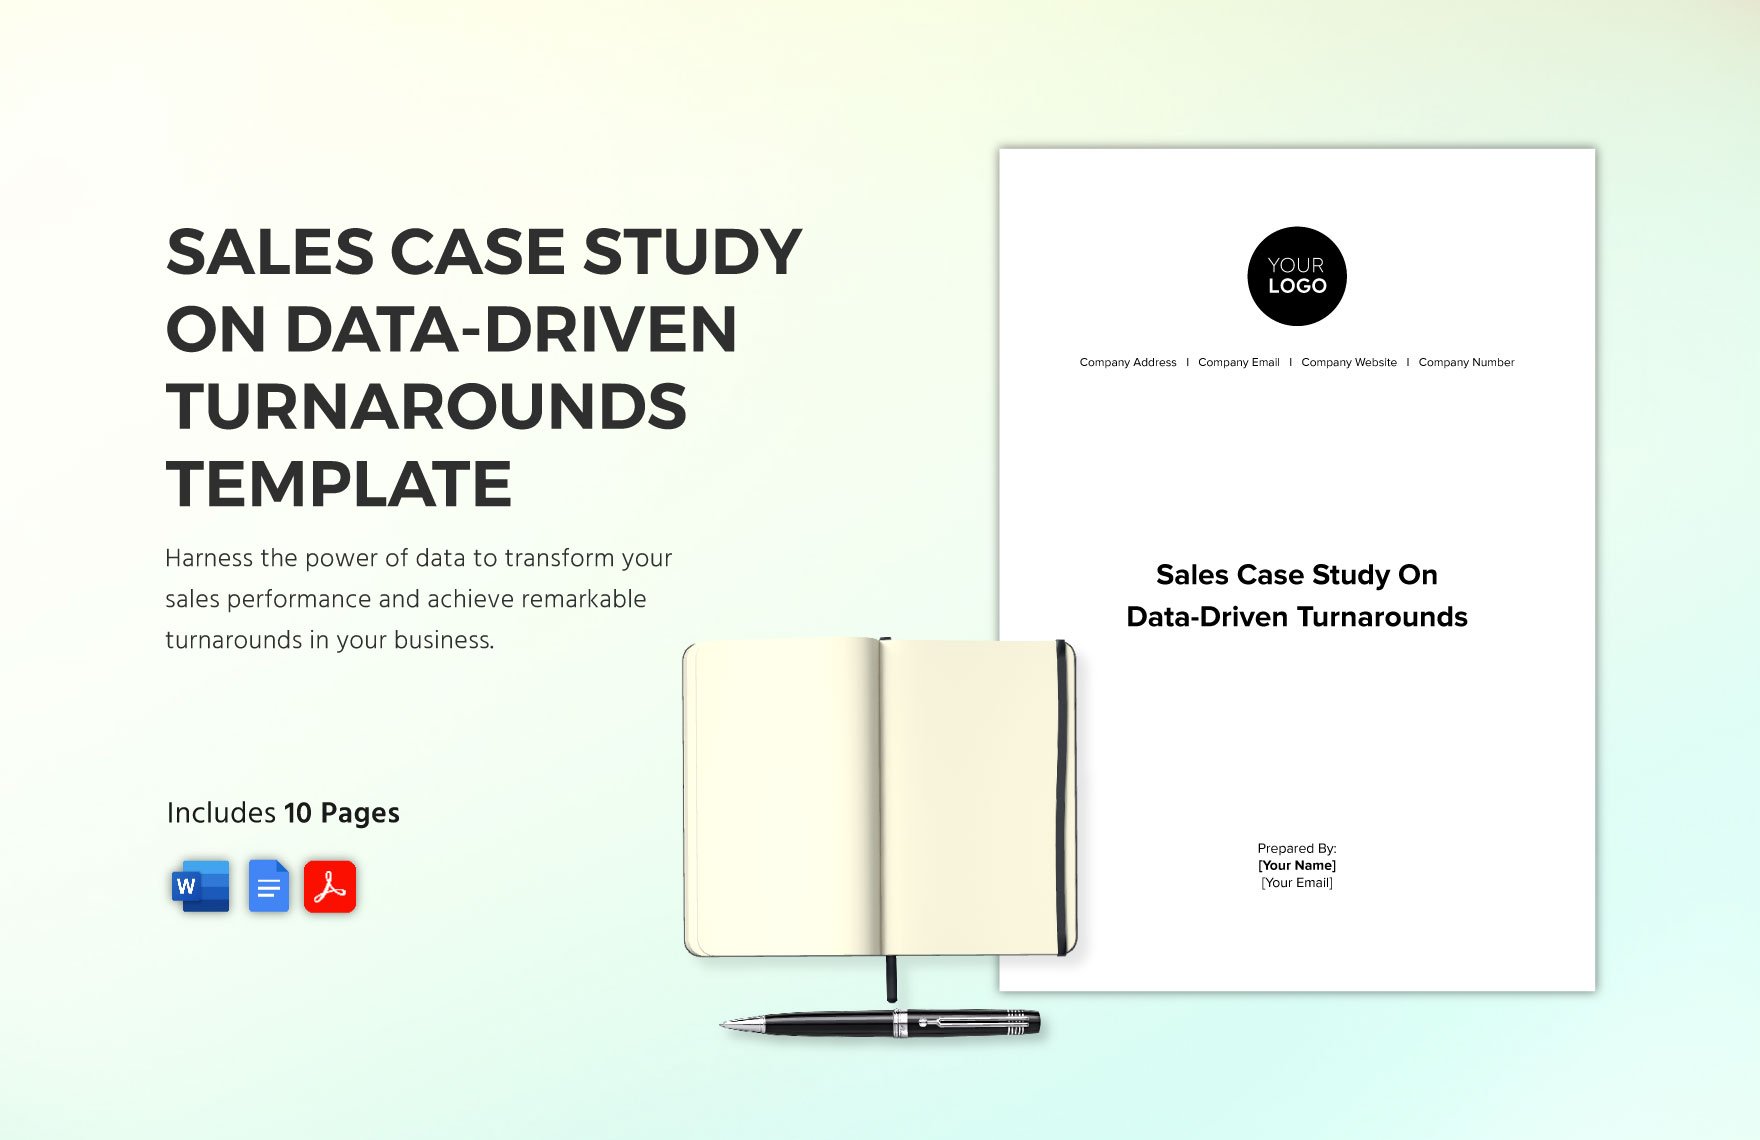 Sales Case Study on Data-Driven Turnarounds Template